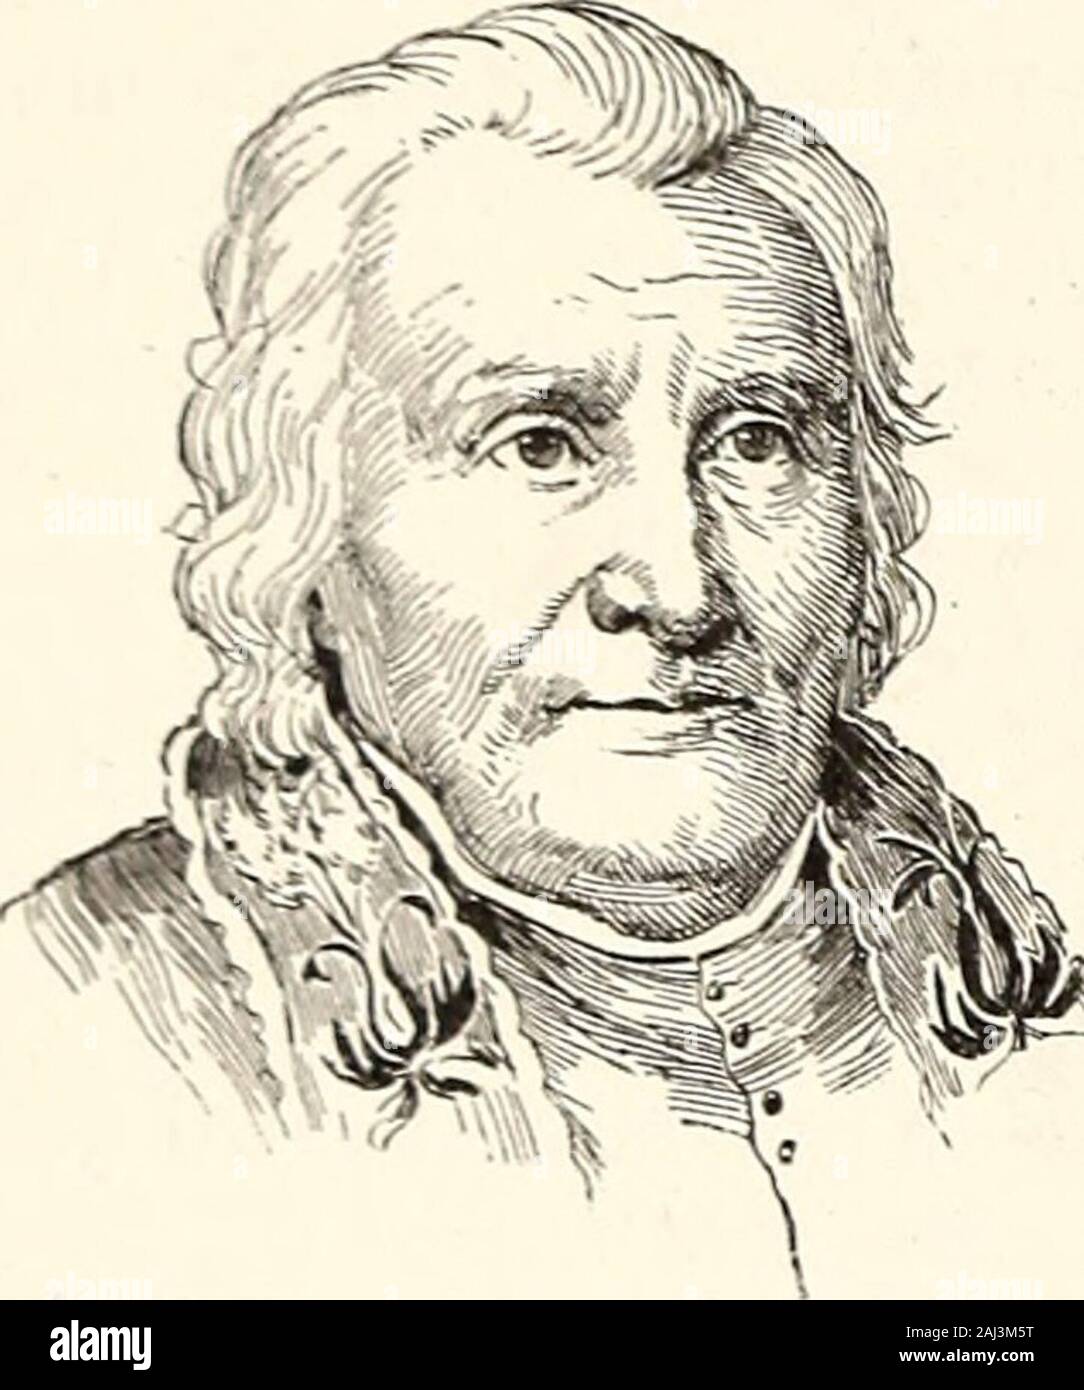 Appletons' cyclopædia of American biography . University ofClermont. He then studied theology at the Sulpi-tian college in the same city, and became a memberof that order in 1783. He continued his studies atIssy, near Paris, and in 1788 was ordained priest.He was professor of dogmatic theology for twoyears in the University of Nantes, and filled thesame office in the seminary of Angers at the begin-ning of the French revolution. He was obliged tofly, and came in 1792 to Baltimore. Md., whence hewas at once sent by Dr. Carrol as chaplain to Vin-cennes, then a military post in the northwest.Duri Stock Photo